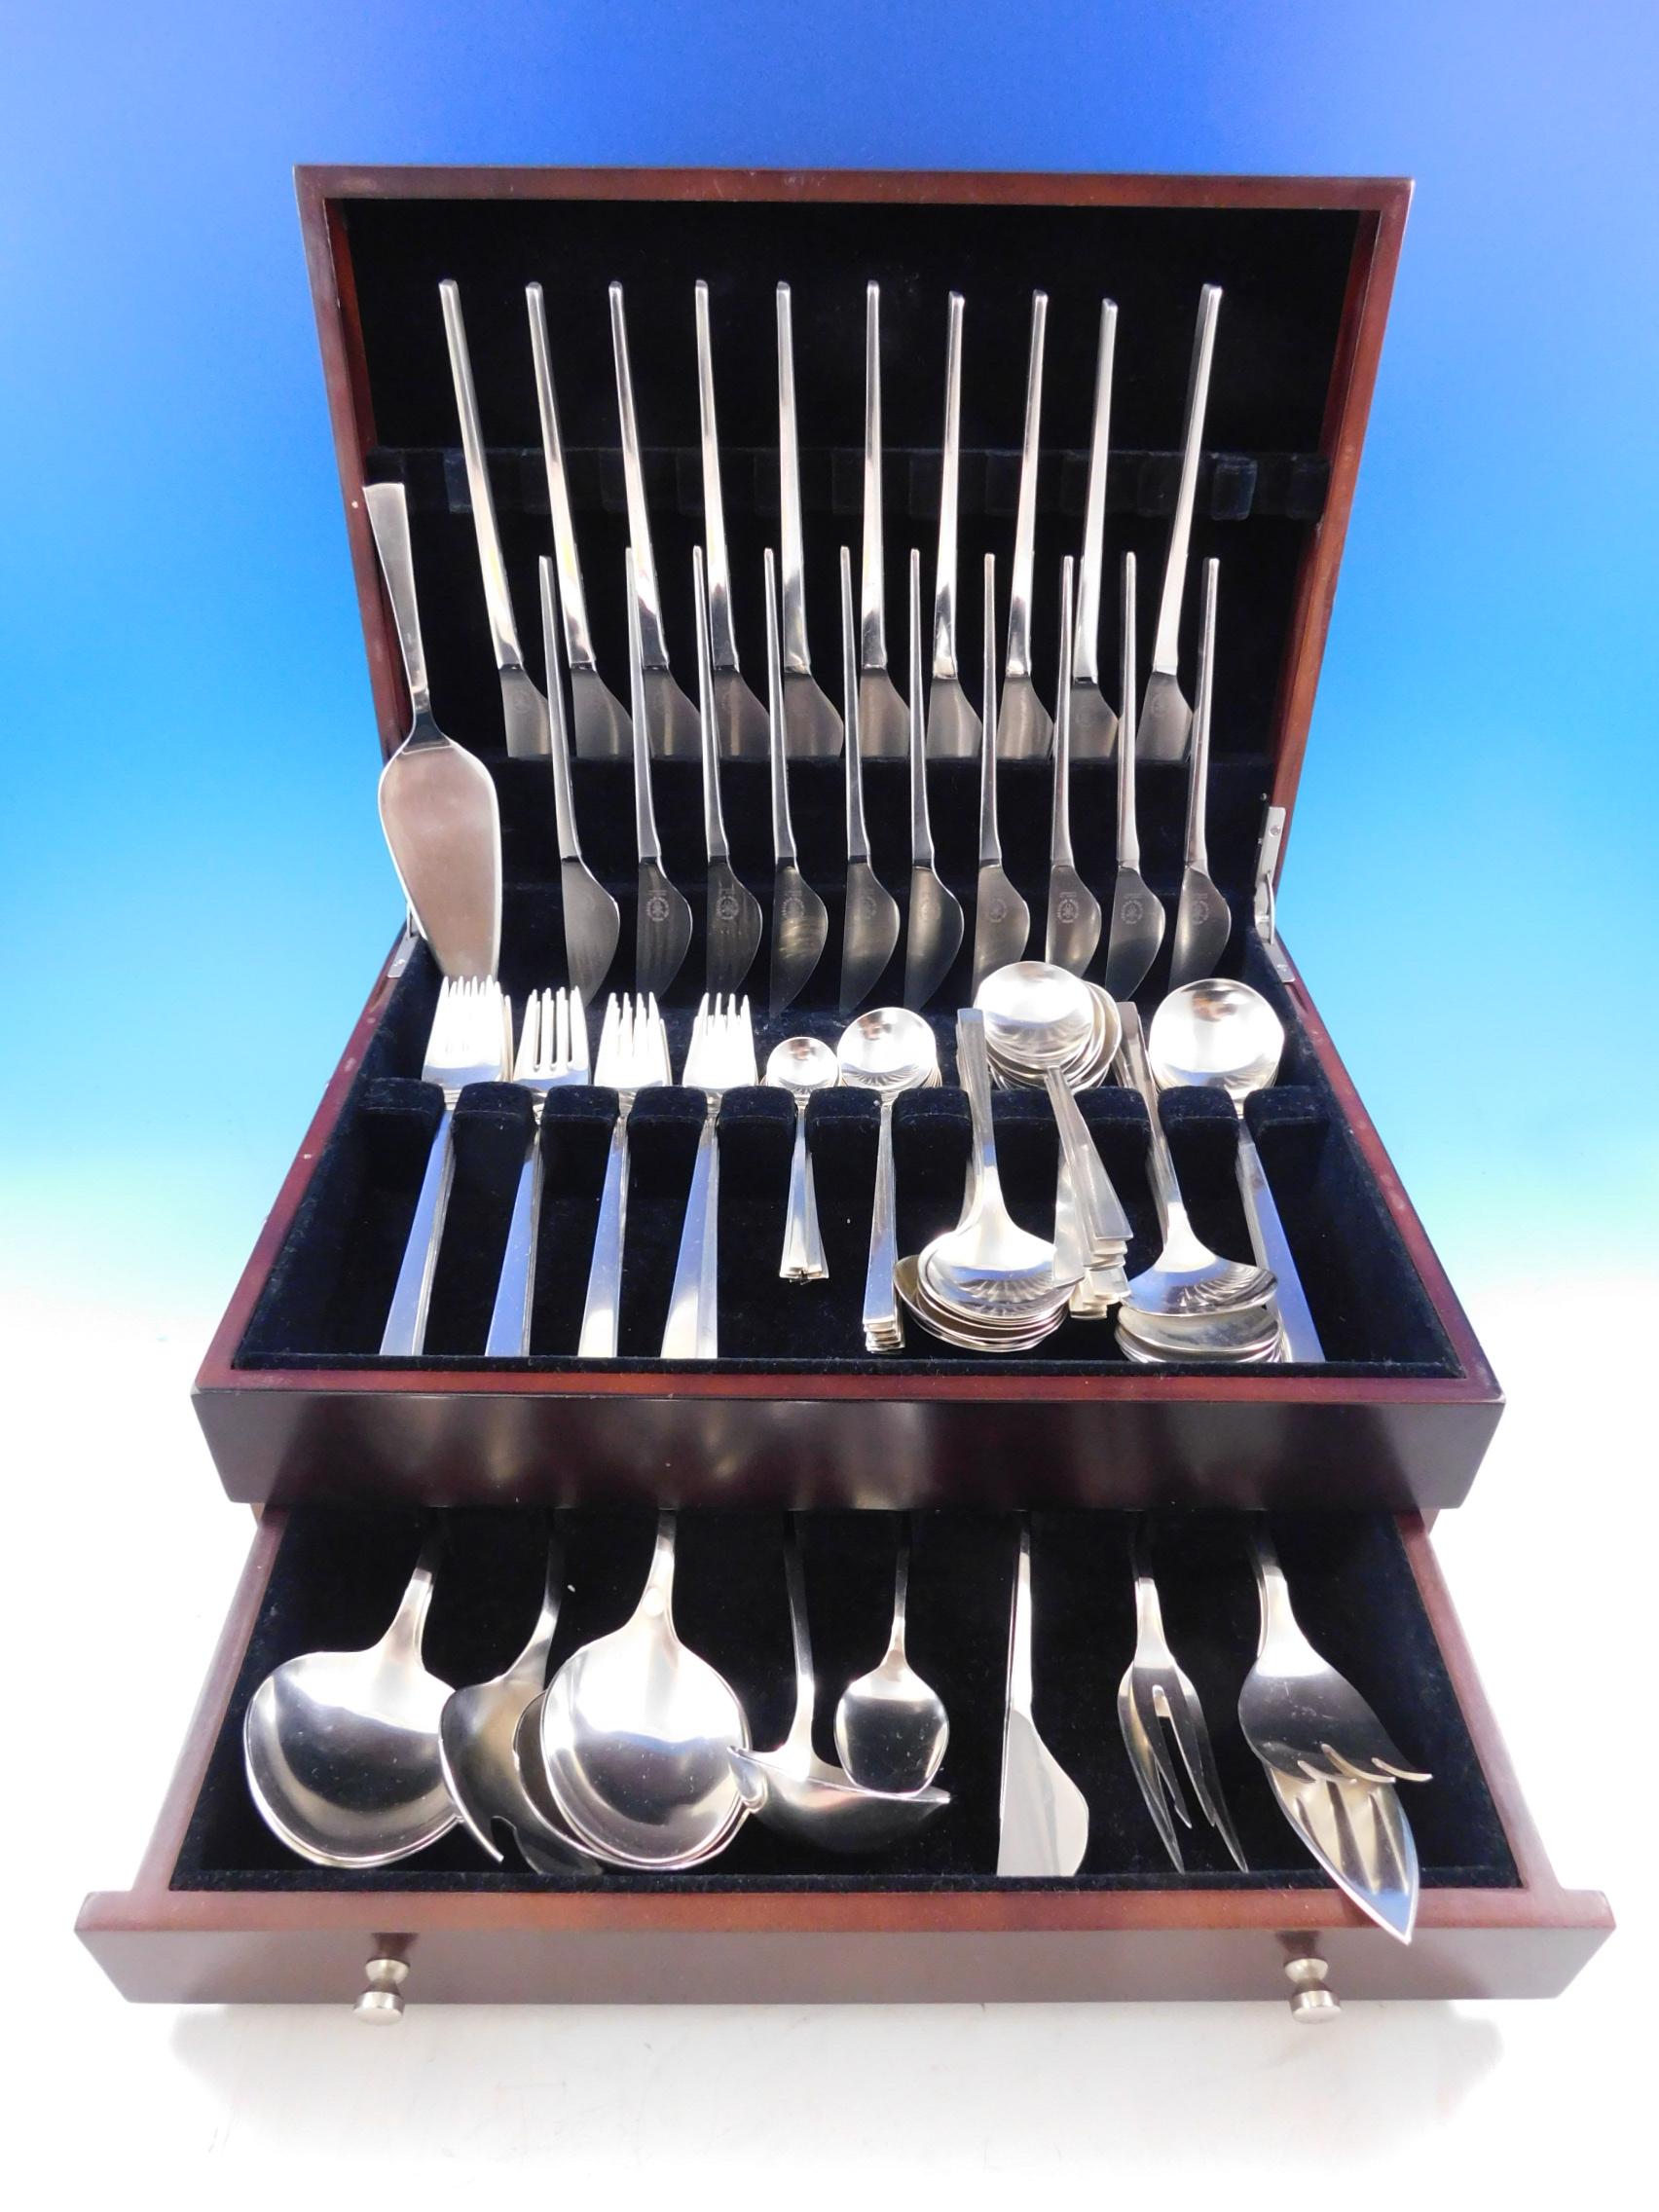 Exceedingly rare Mid-Century Modern 102 piece set of sterling silver flatware designed by Alexander Schaffner (Germany) in the innovative Number 89 by Carl Hugo Pott. This superb set includes:

10 dinner knives, 8 1/2